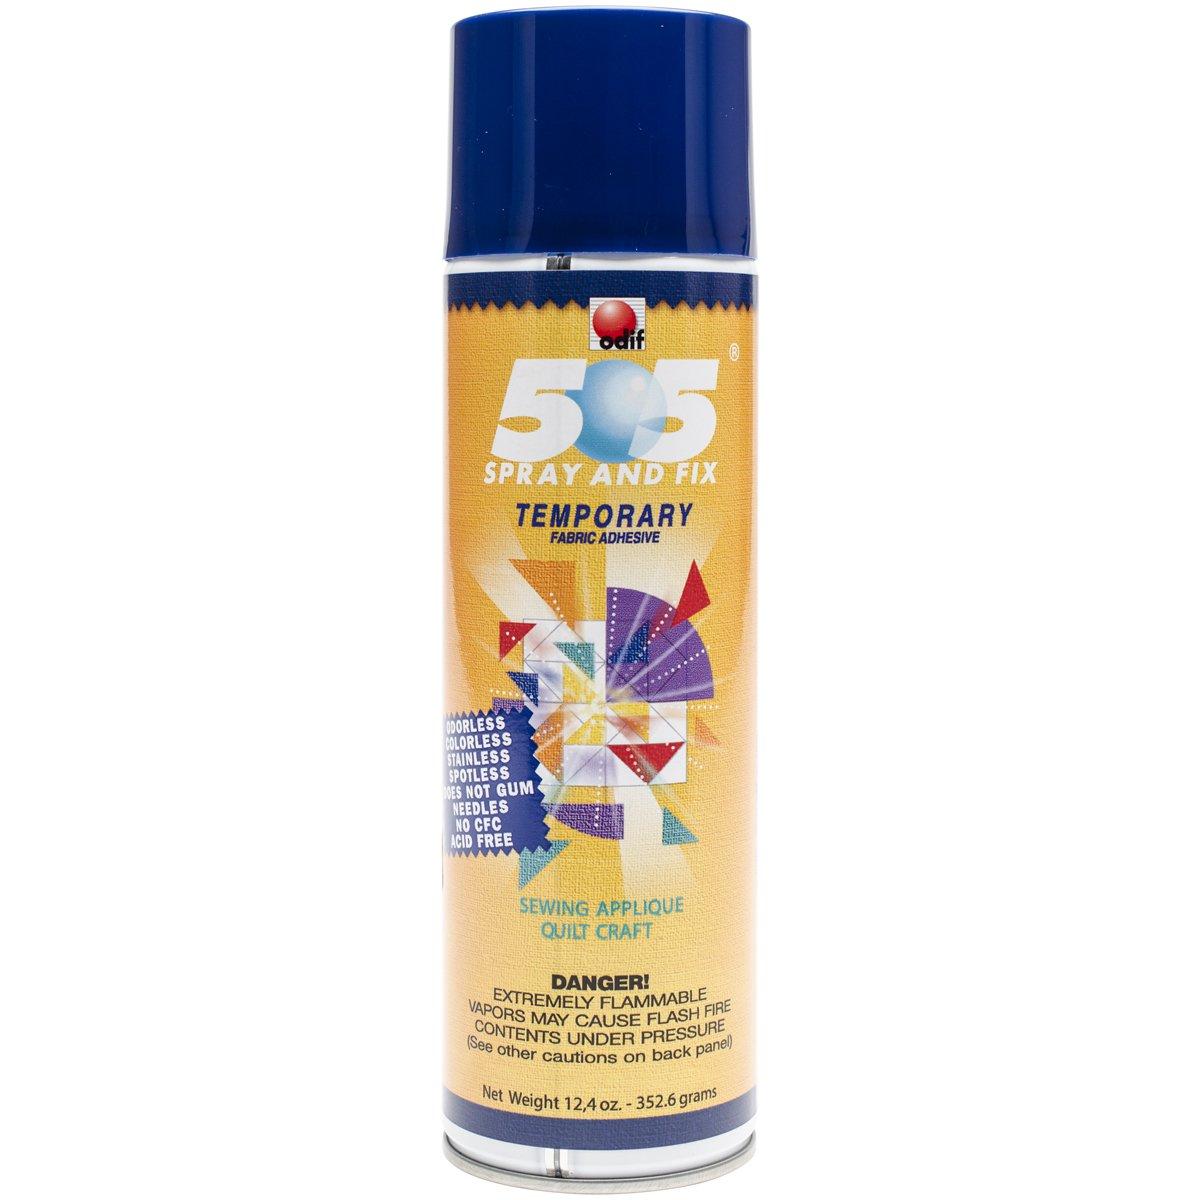 Odif USA 505 Spray and Fix Temporary Fabric Adhesive 12.4oz Pack